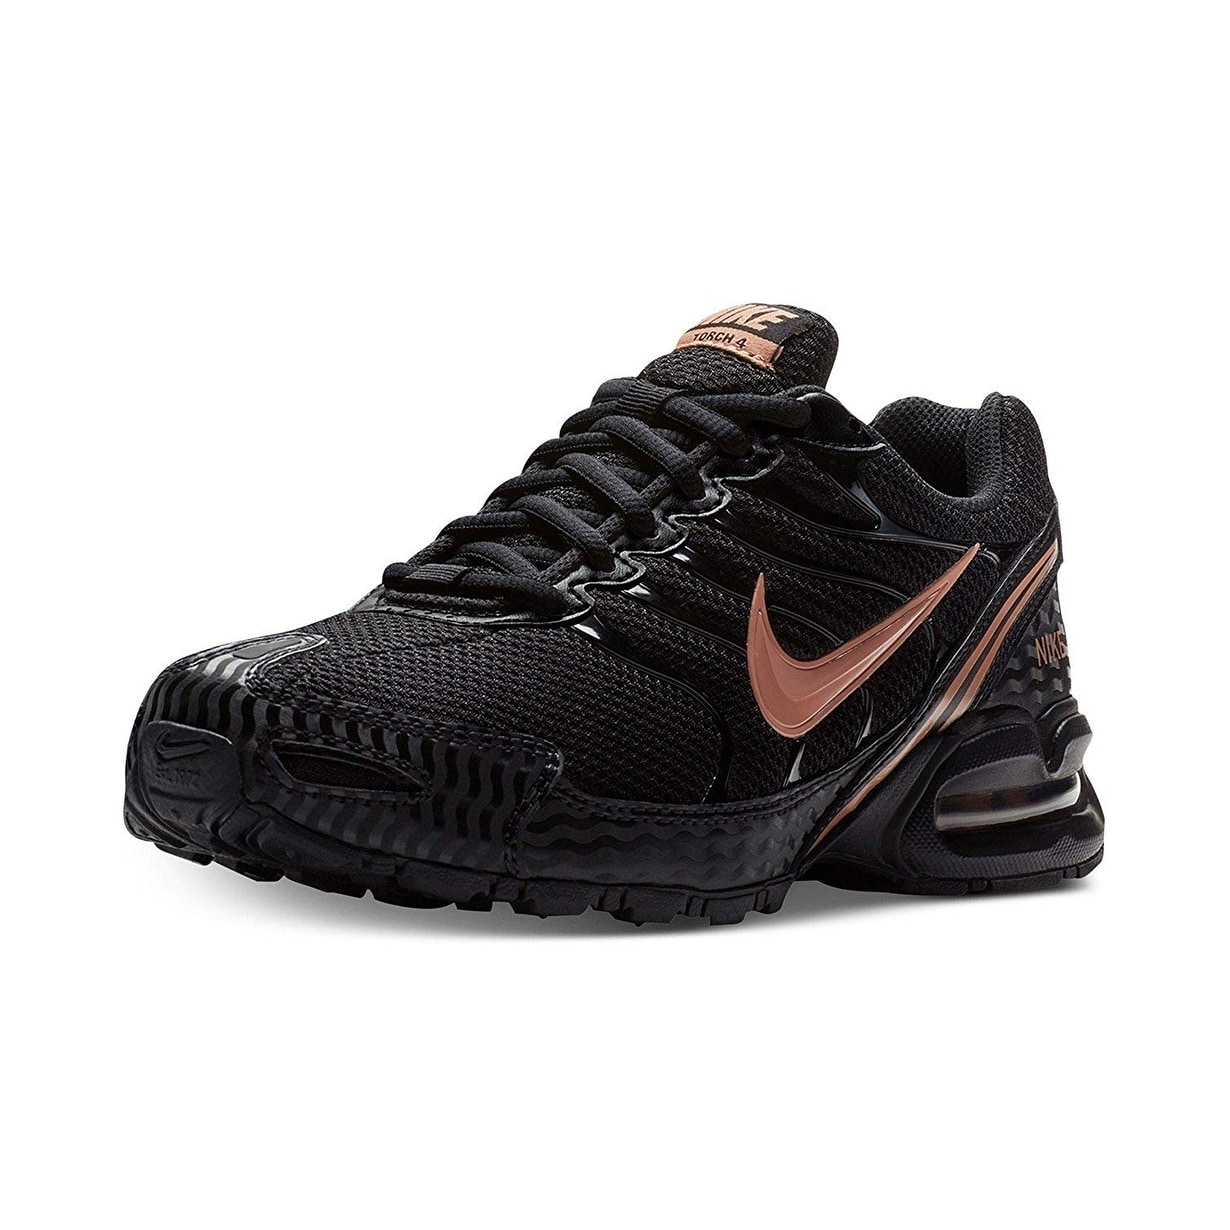 nike black and rose gold shoes